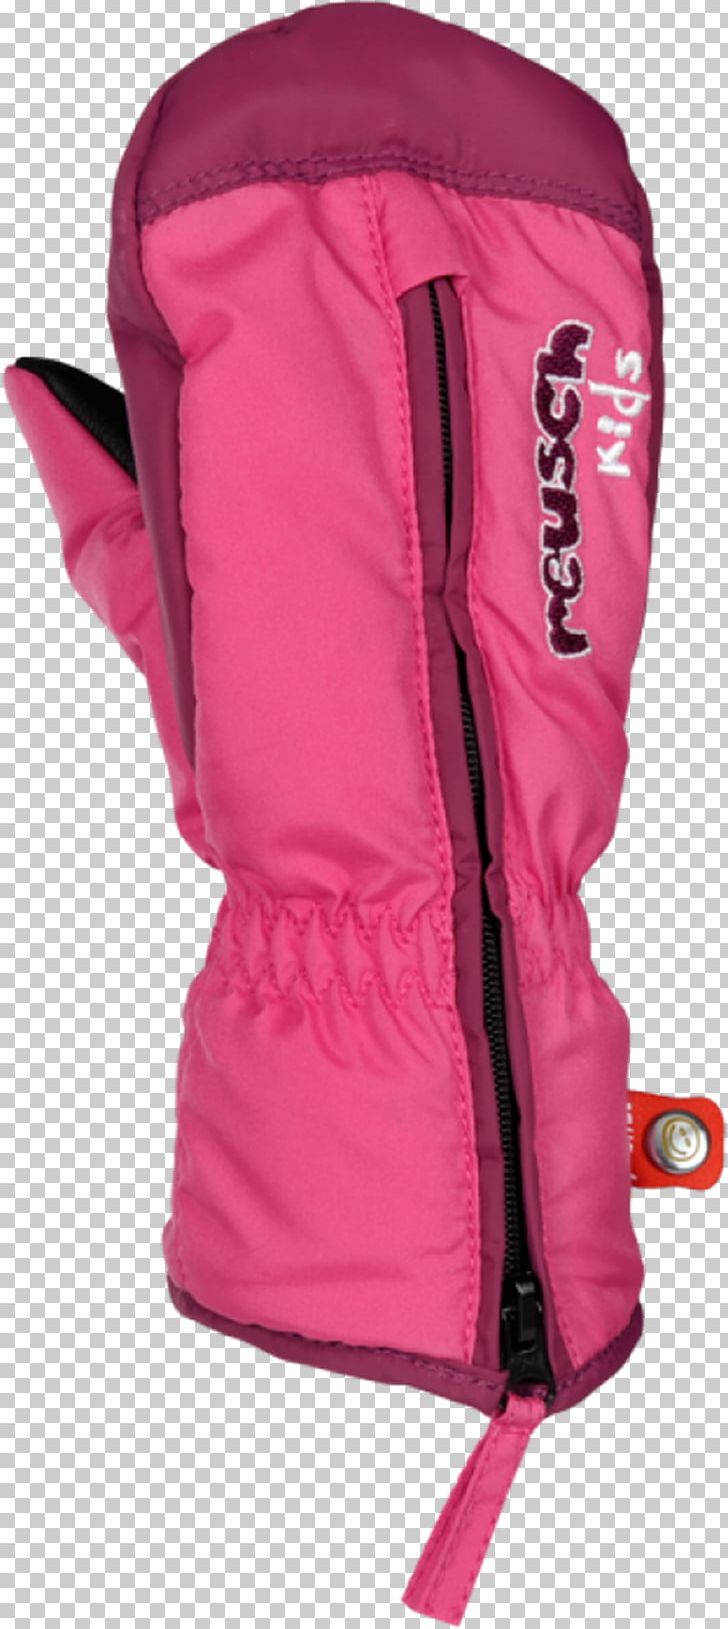 Reusch International Skiing Sports Glove Jacket PNG, Clipart, Car Seat Cover, Click Free Shipping, Glove, Jacket, Magenta Free PNG Download